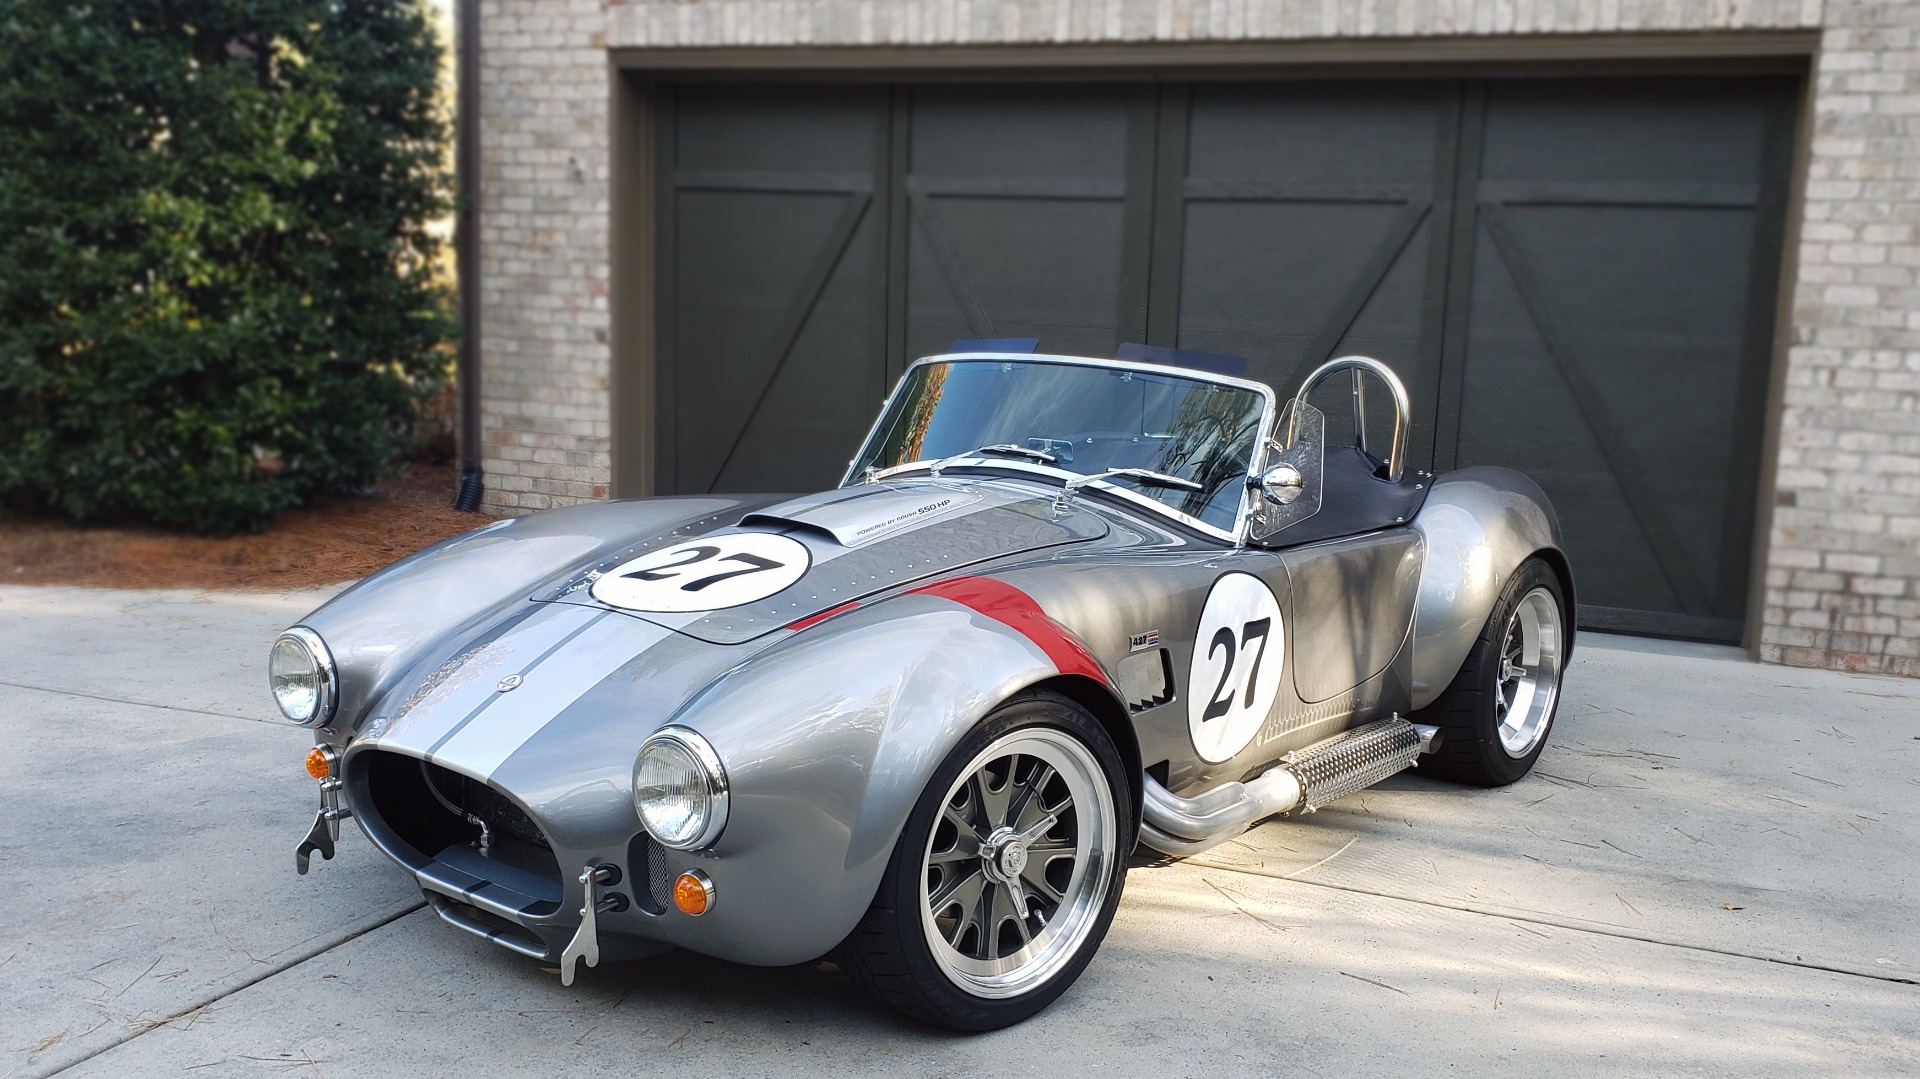 Used 1965 Ford COBRA 427 ROADSTER BY BACKDRAFT RACING ROUSH 553HP V8 / TREMEC 6-SPD / PWR STRNG for sale Sold at Formula Imports in Charlotte NC 28227 11